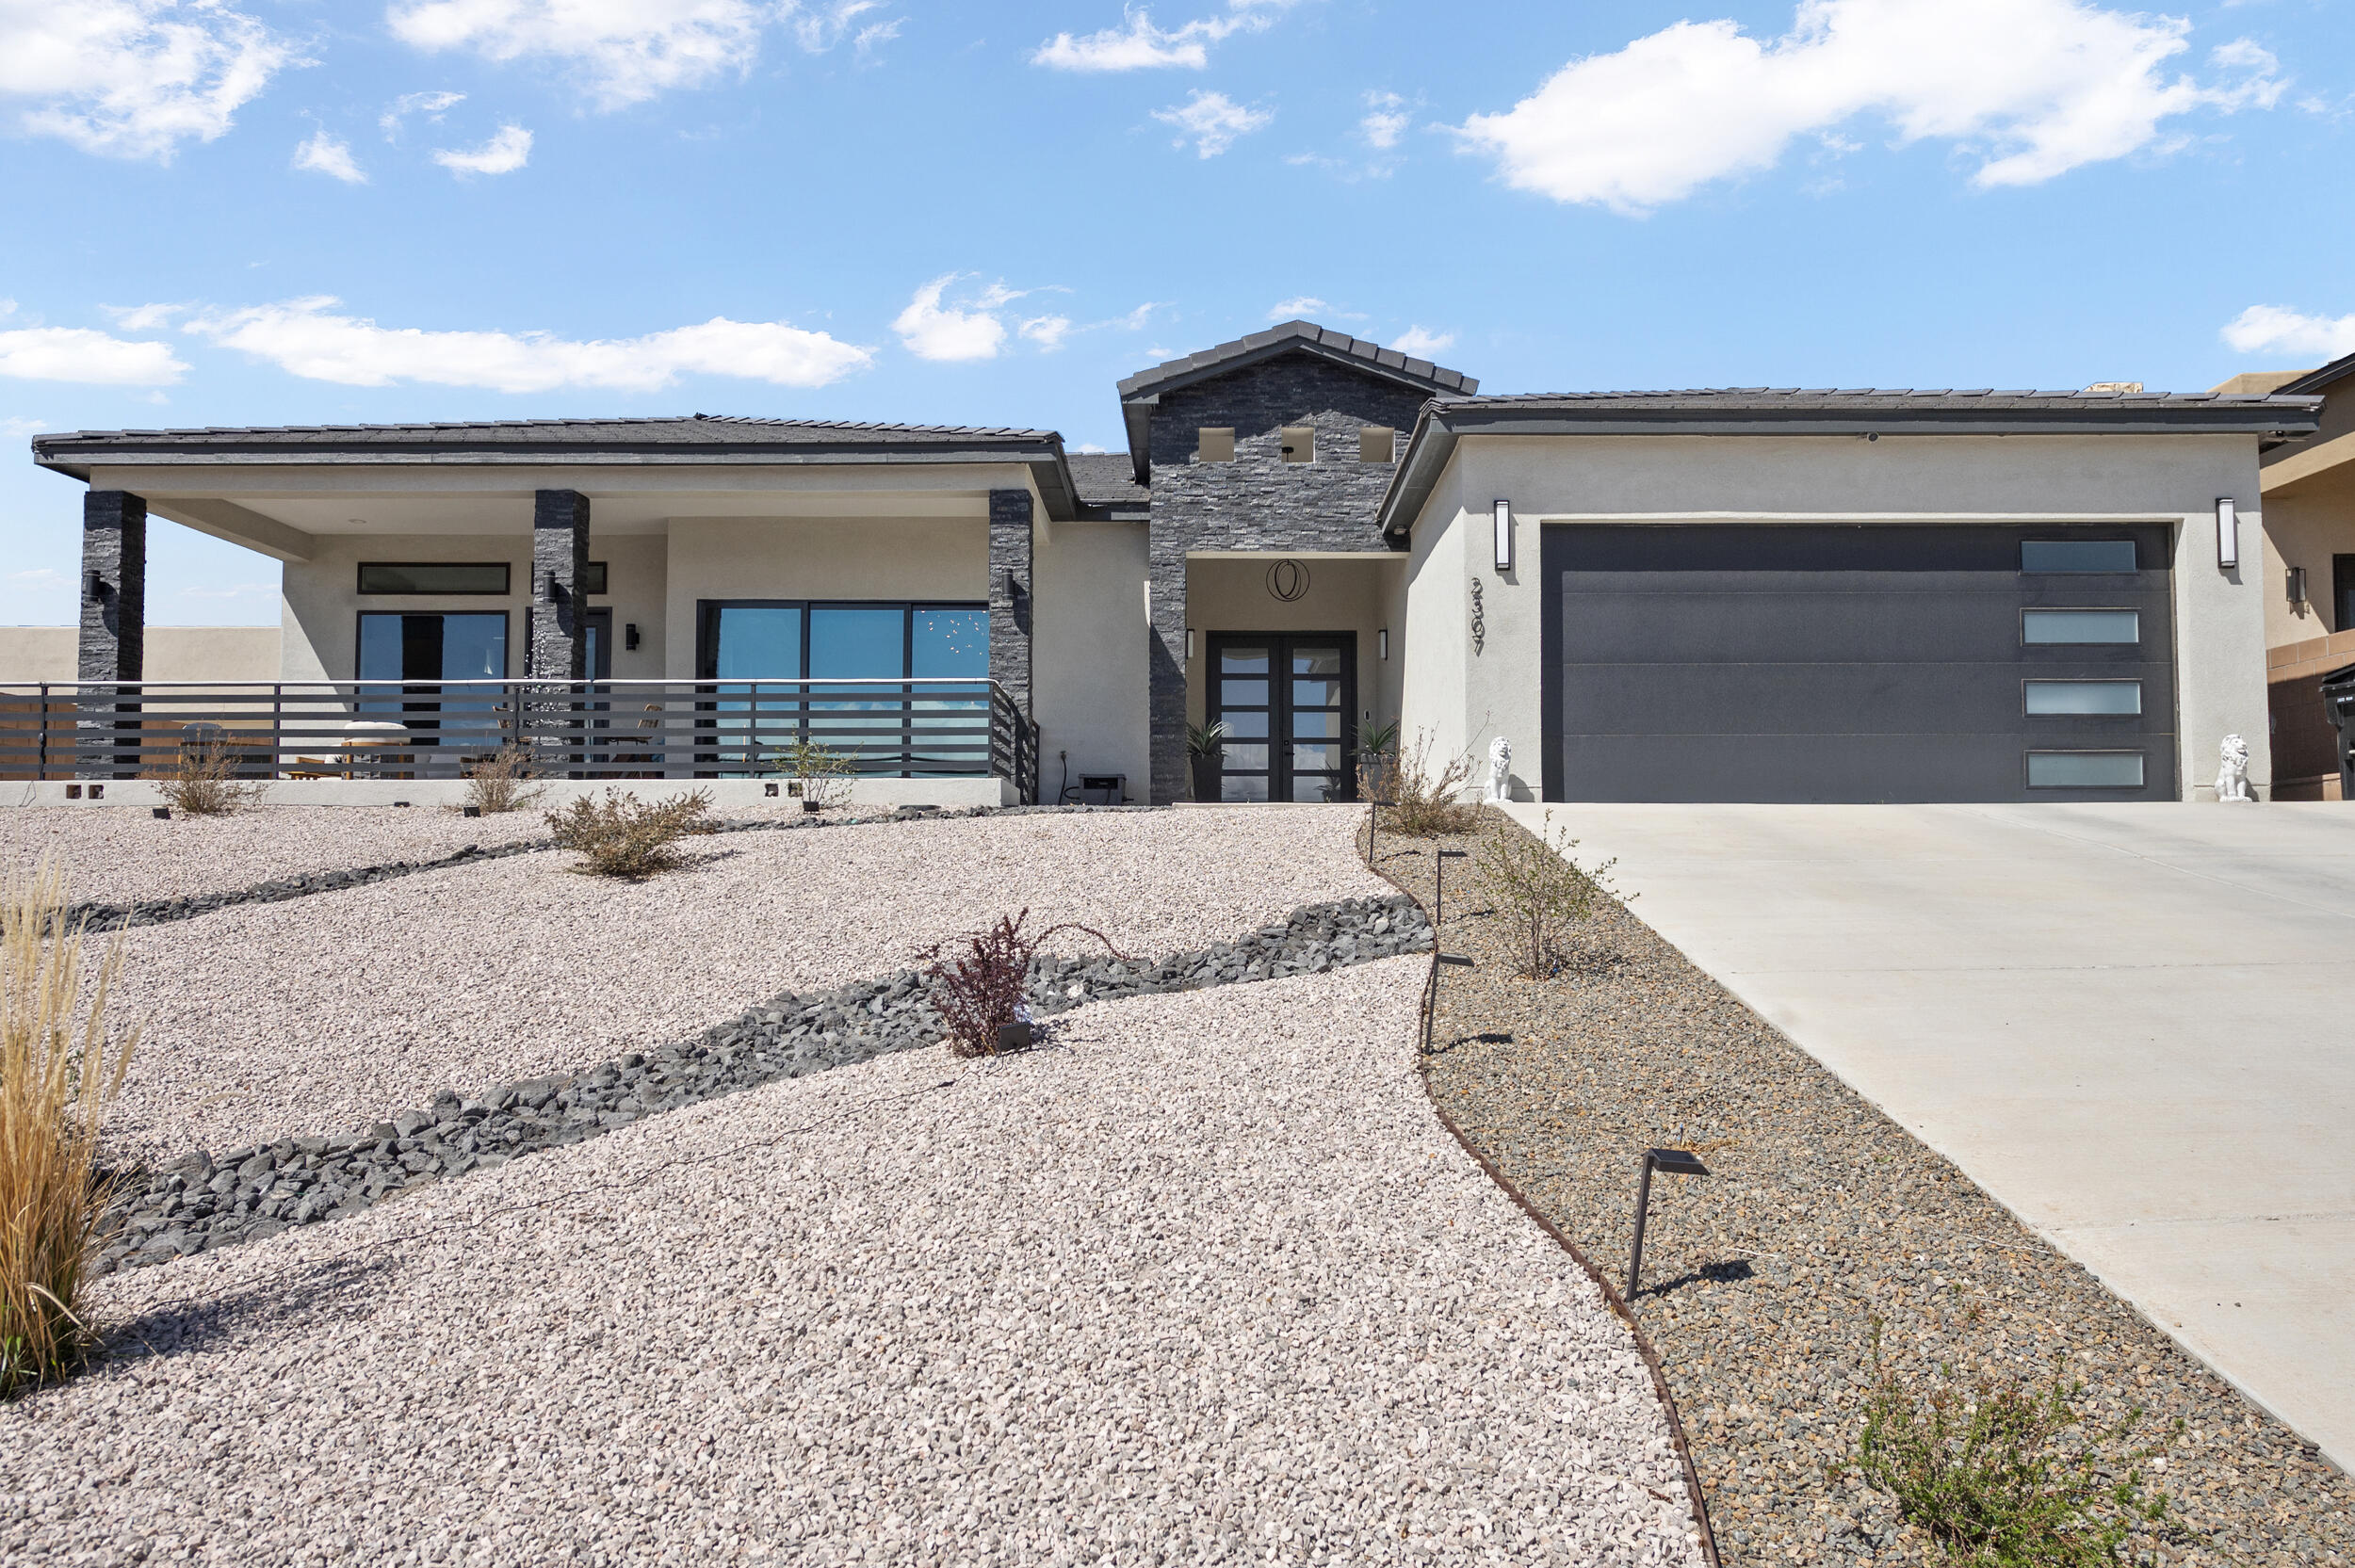 2307 13th Street SE, Rio Rancho, New Mexico 87124, 4 Bedrooms Bedrooms, ,4 BathroomsBathrooms,Residential,For Sale,2307 13th Street SE,1061343